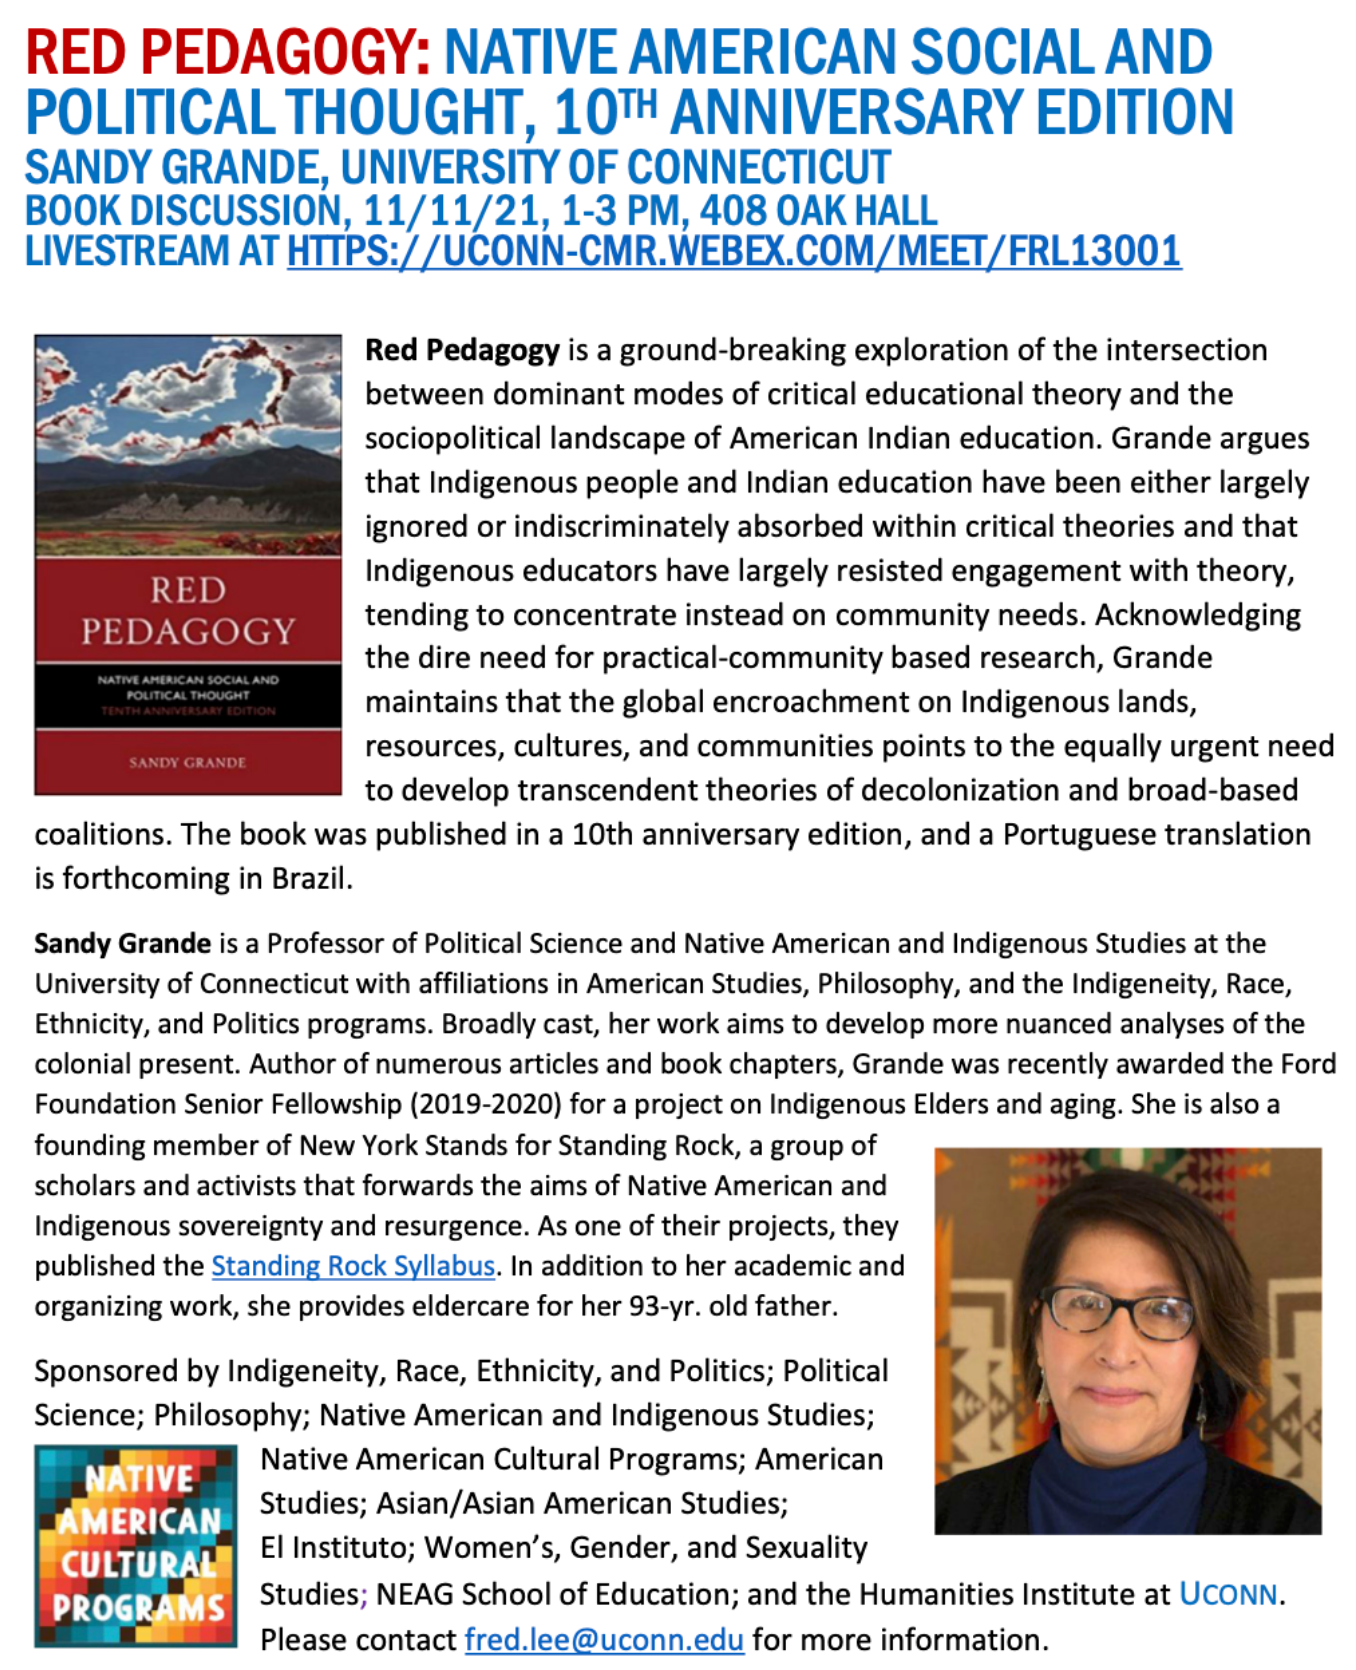 Red Pedagogy: Native American Social and Political Thought, 10th Anniversary Edition Book Discussion